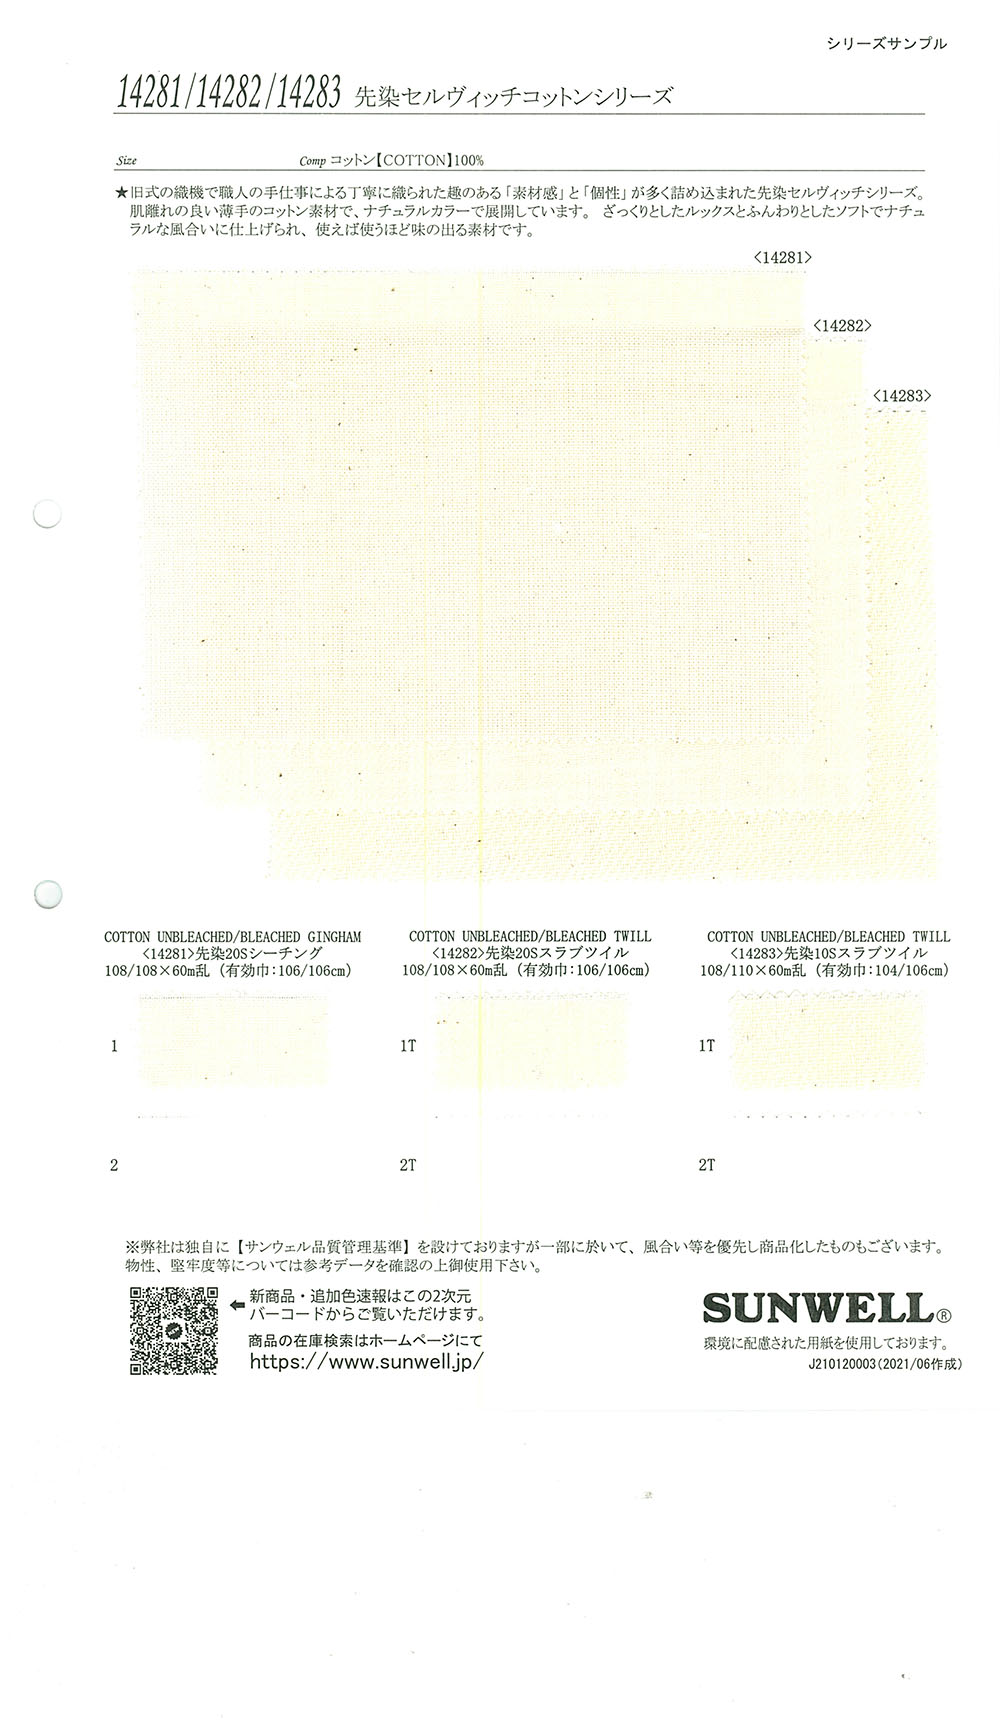 14281 Selvage Cotton Series Yarn Dyed 20 Single Thread Loomstate[Textile / Fabric] SUNWELL